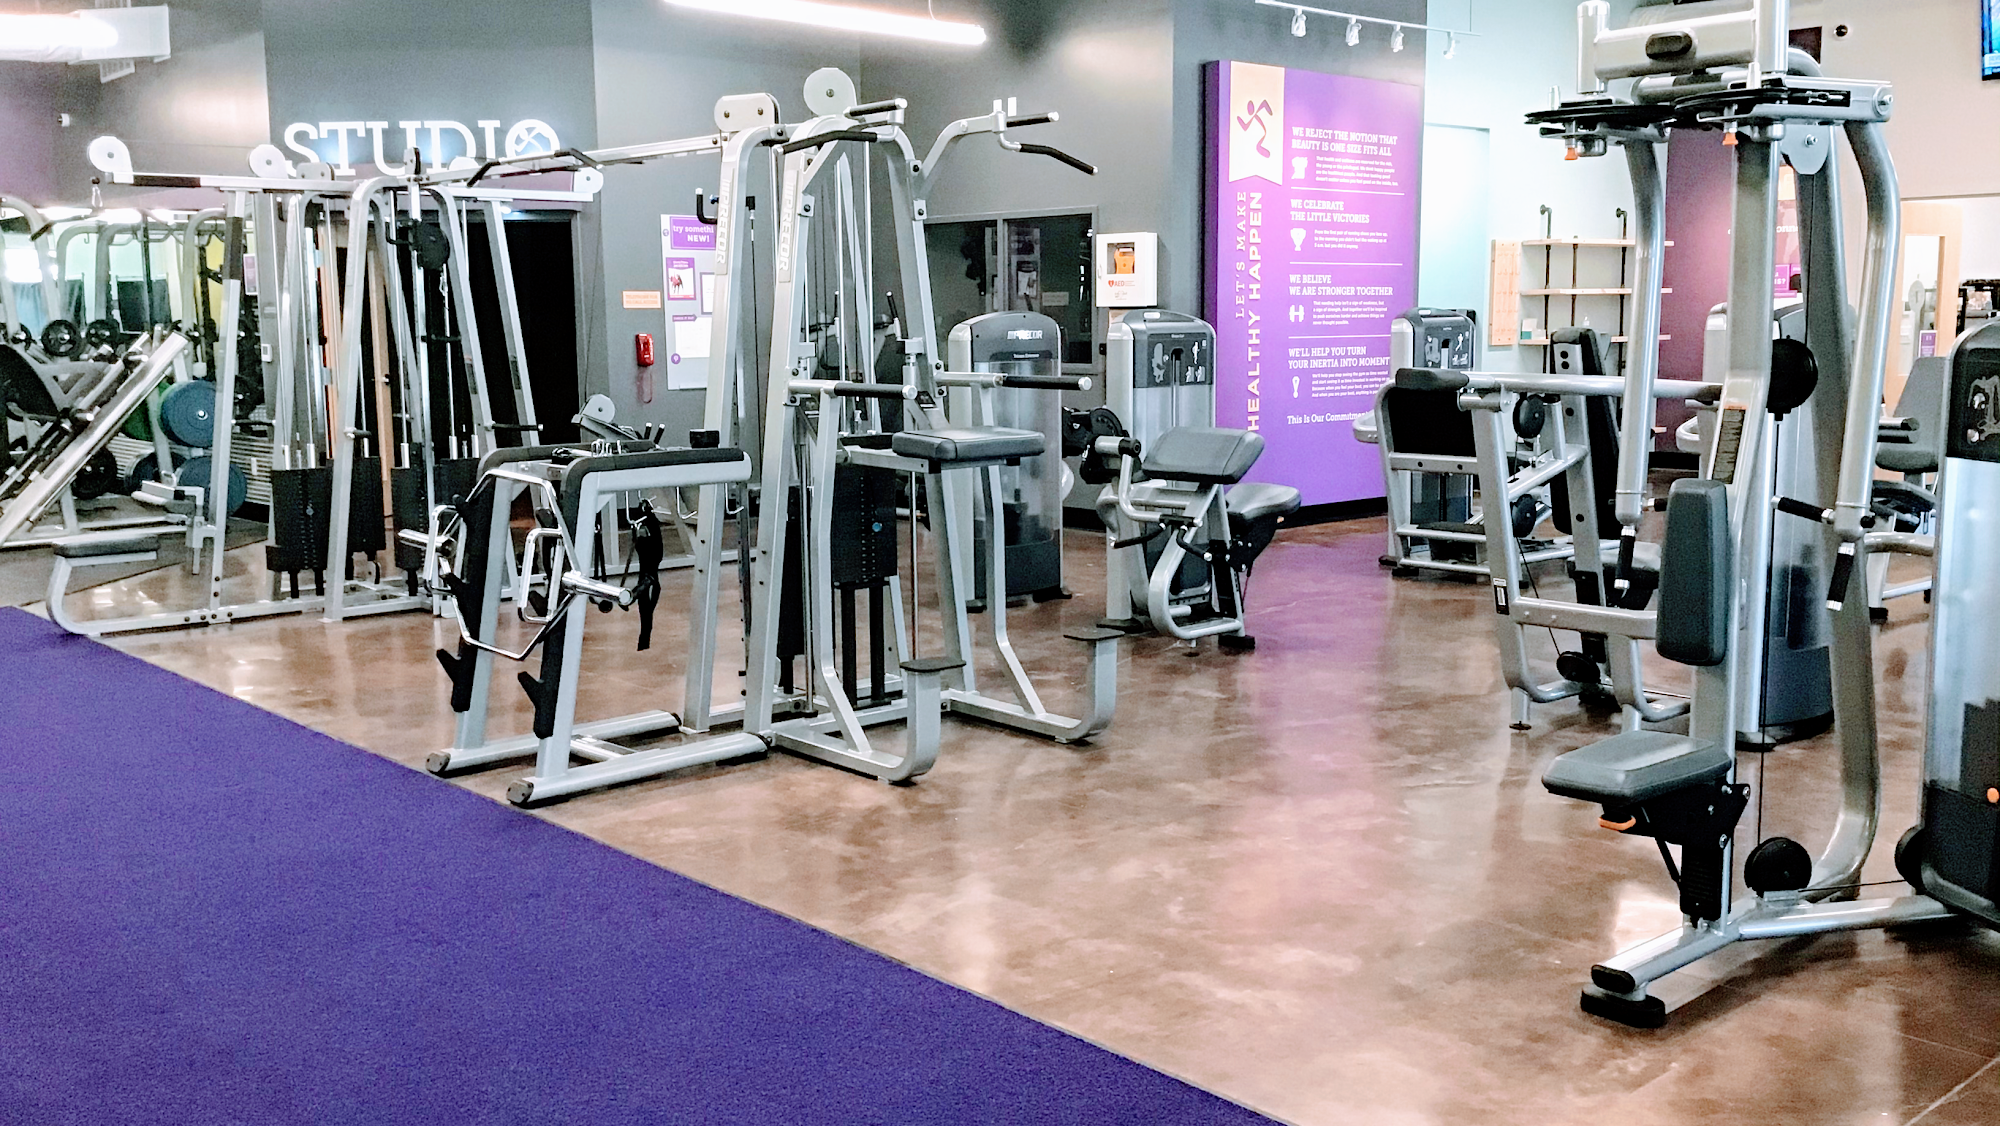 Anytime Fitness St. Francisville